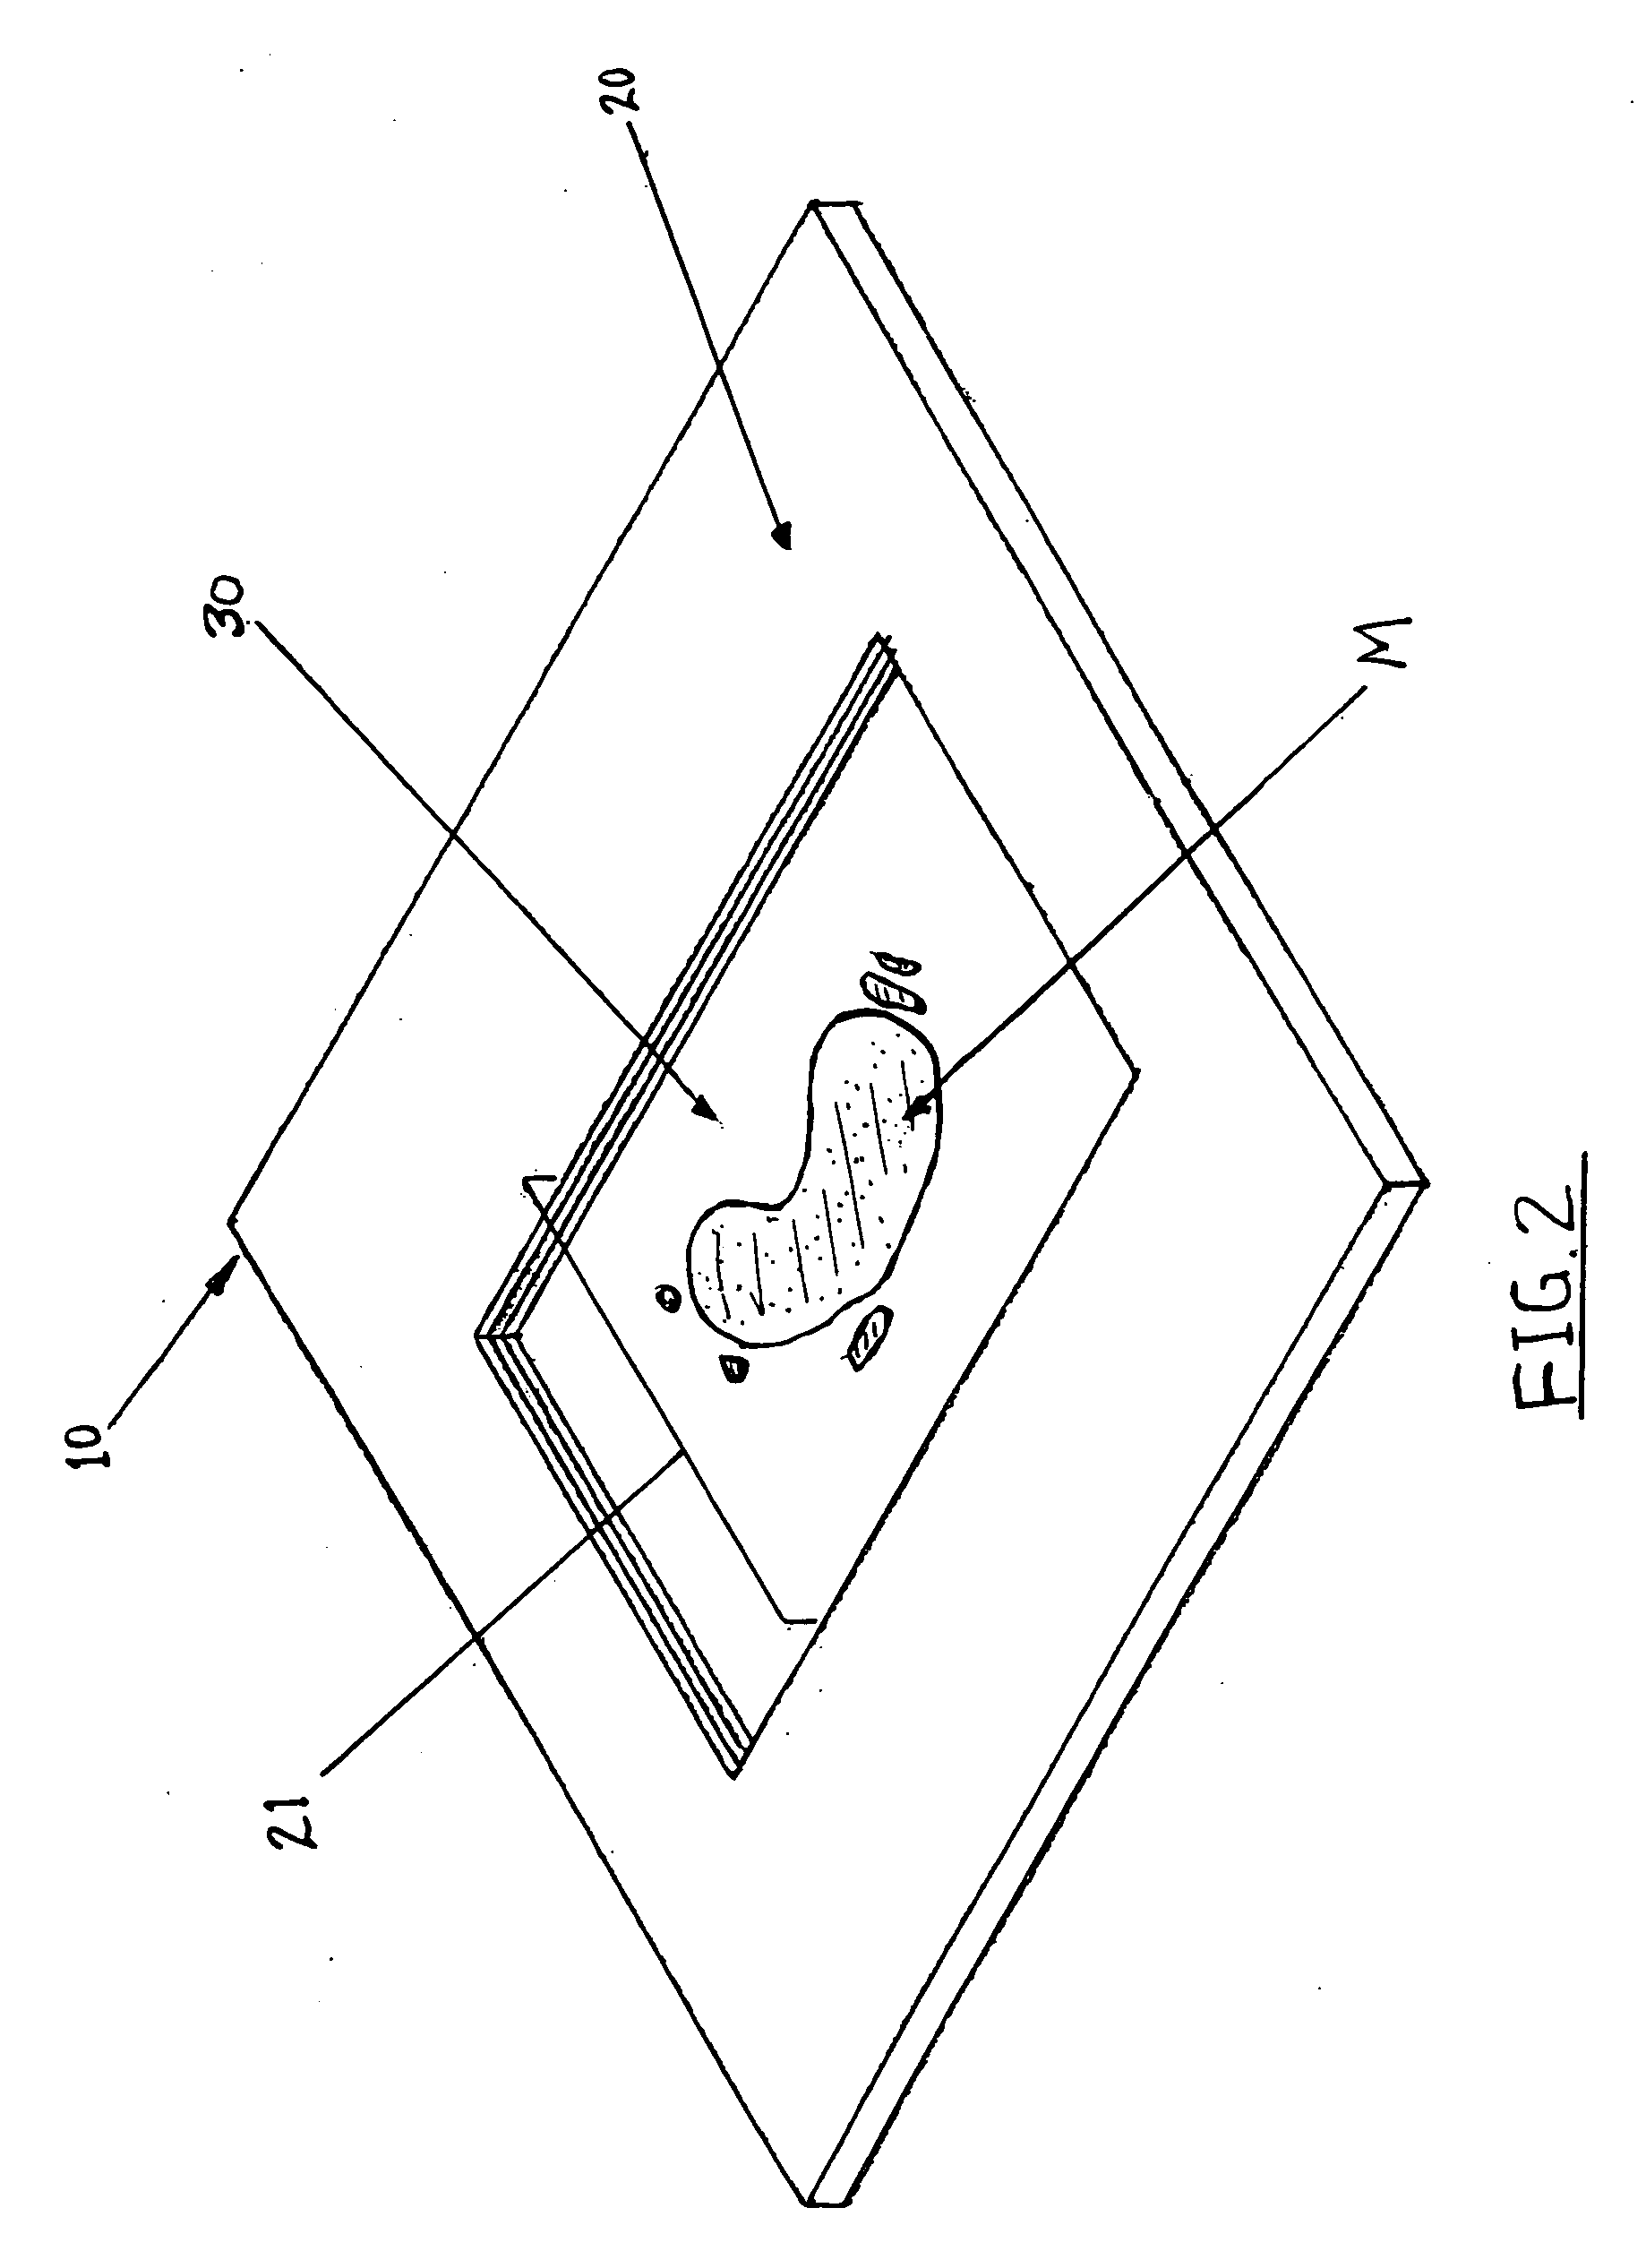 Method and apparatus for particle radiation therapy and practice of particle medicine